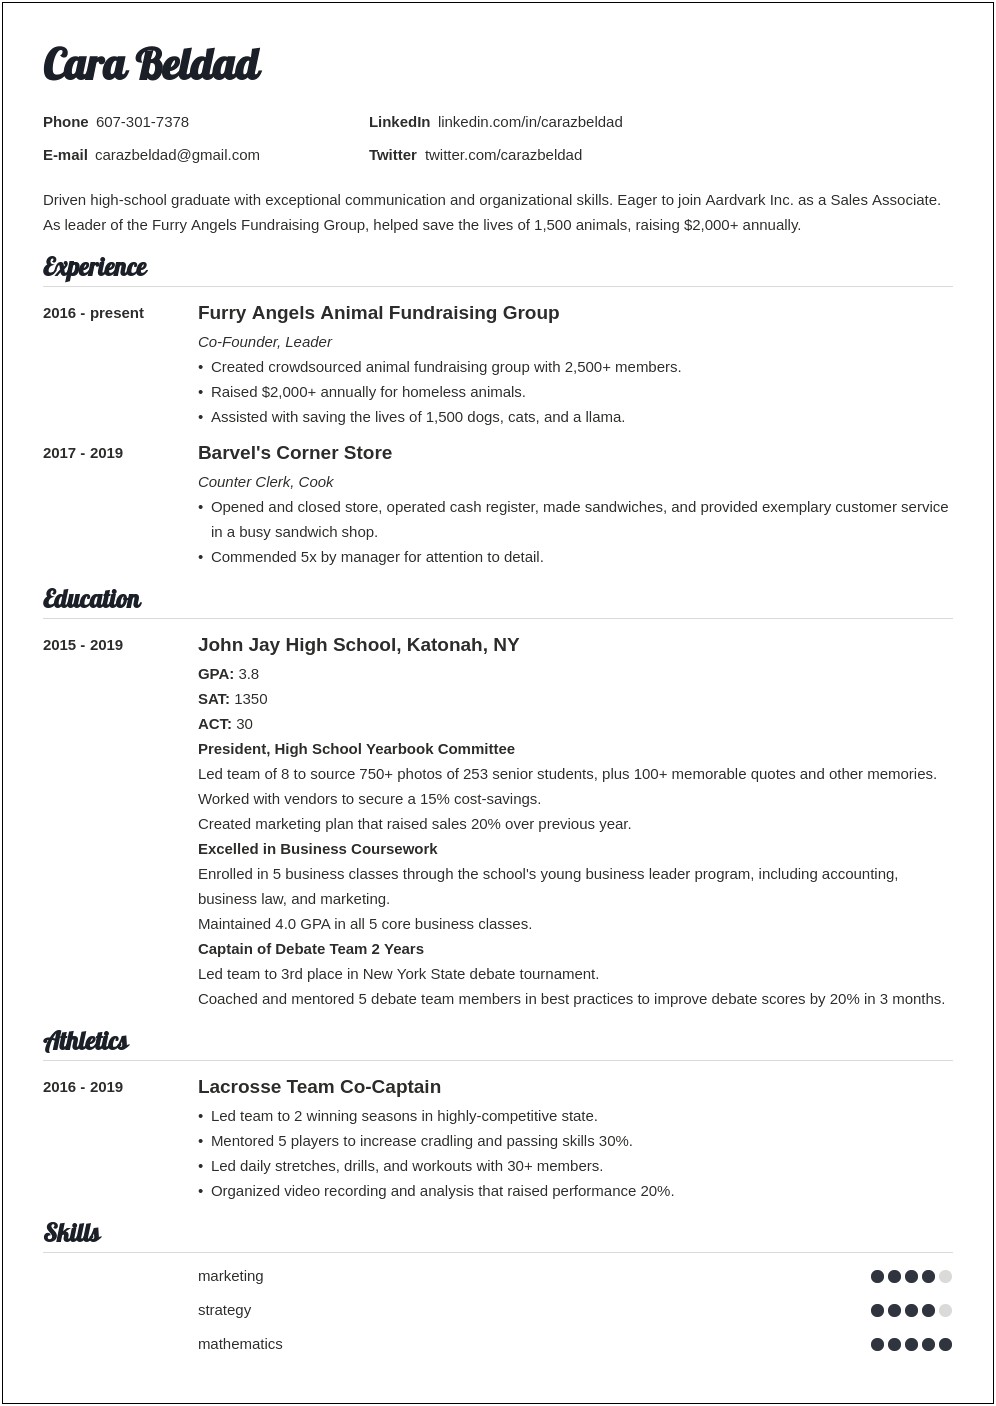 Resume Education Section For High School